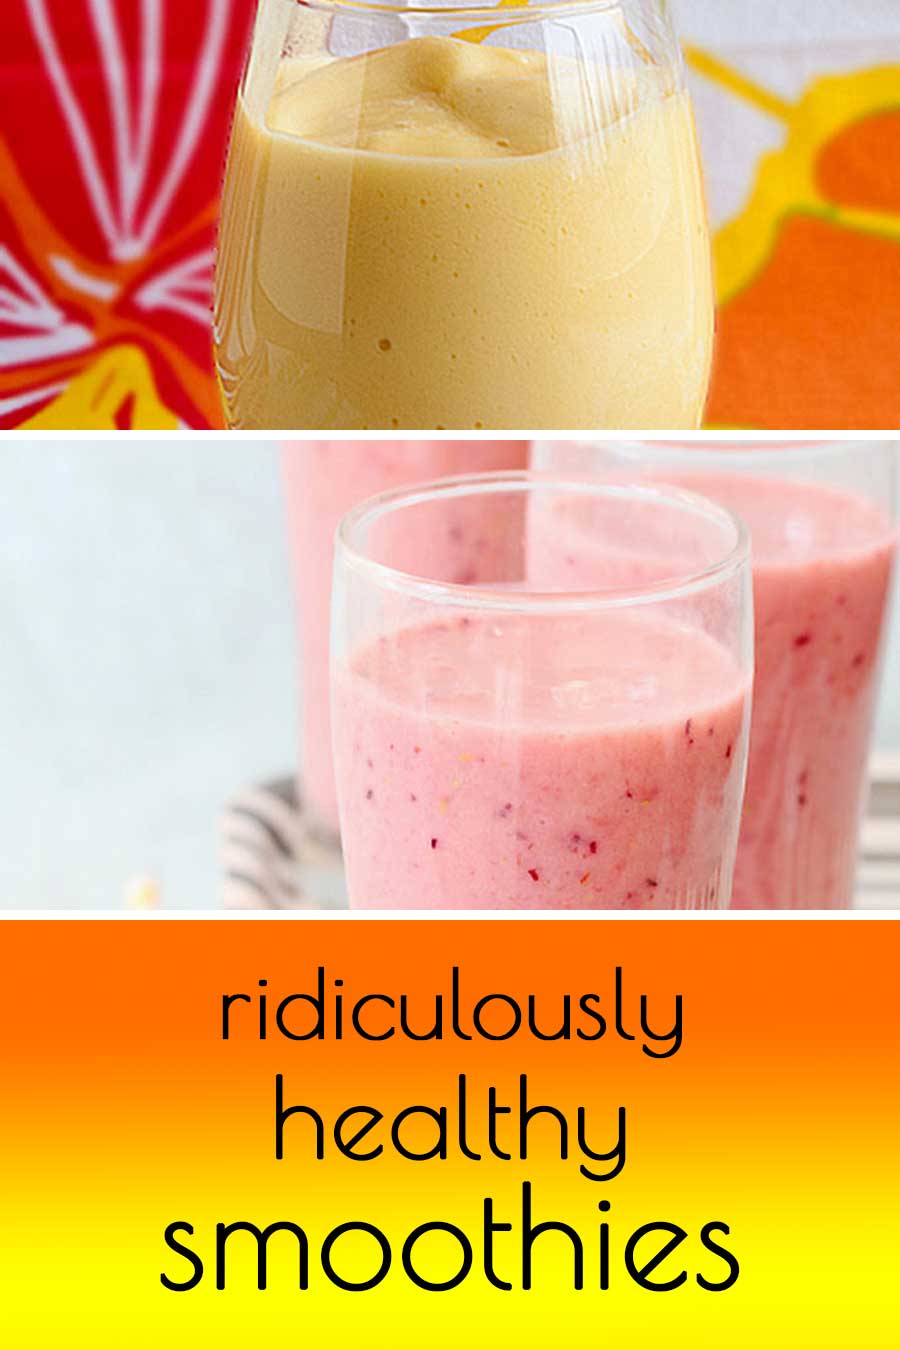 22 ridiculously healthy smoothies